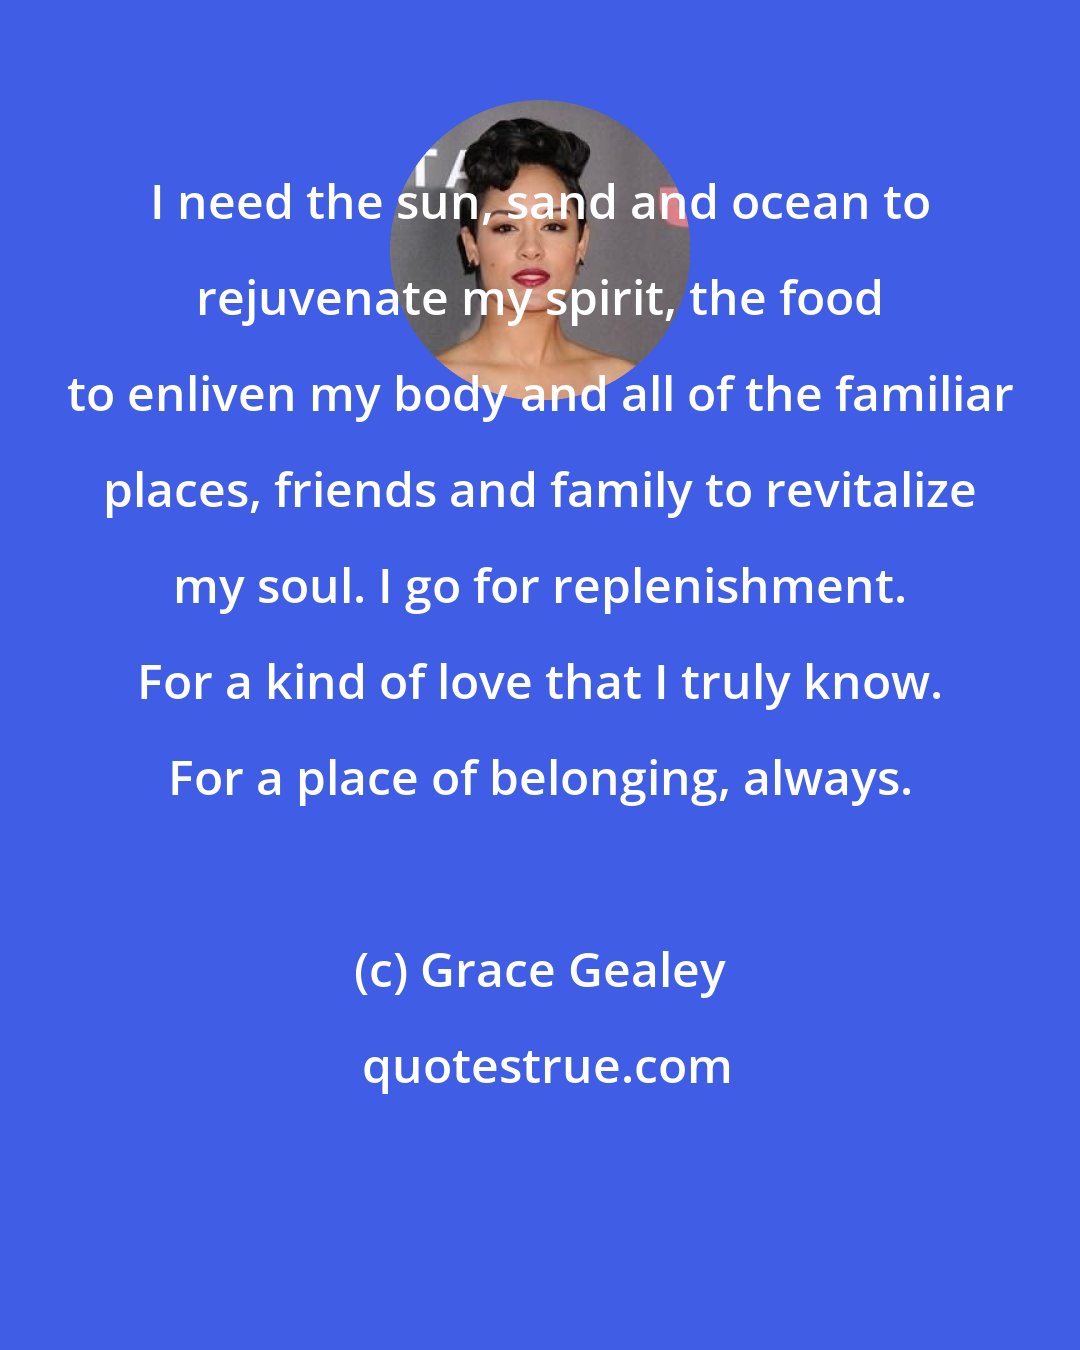 Grace Gealey: I need the sun, sand and ocean to rejuvenate my spirit, the food to enliven my body and all of the familiar places, friends and family to revitalize my soul. I go for replenishment. For a kind of love that I truly know. For a place of belonging, always.